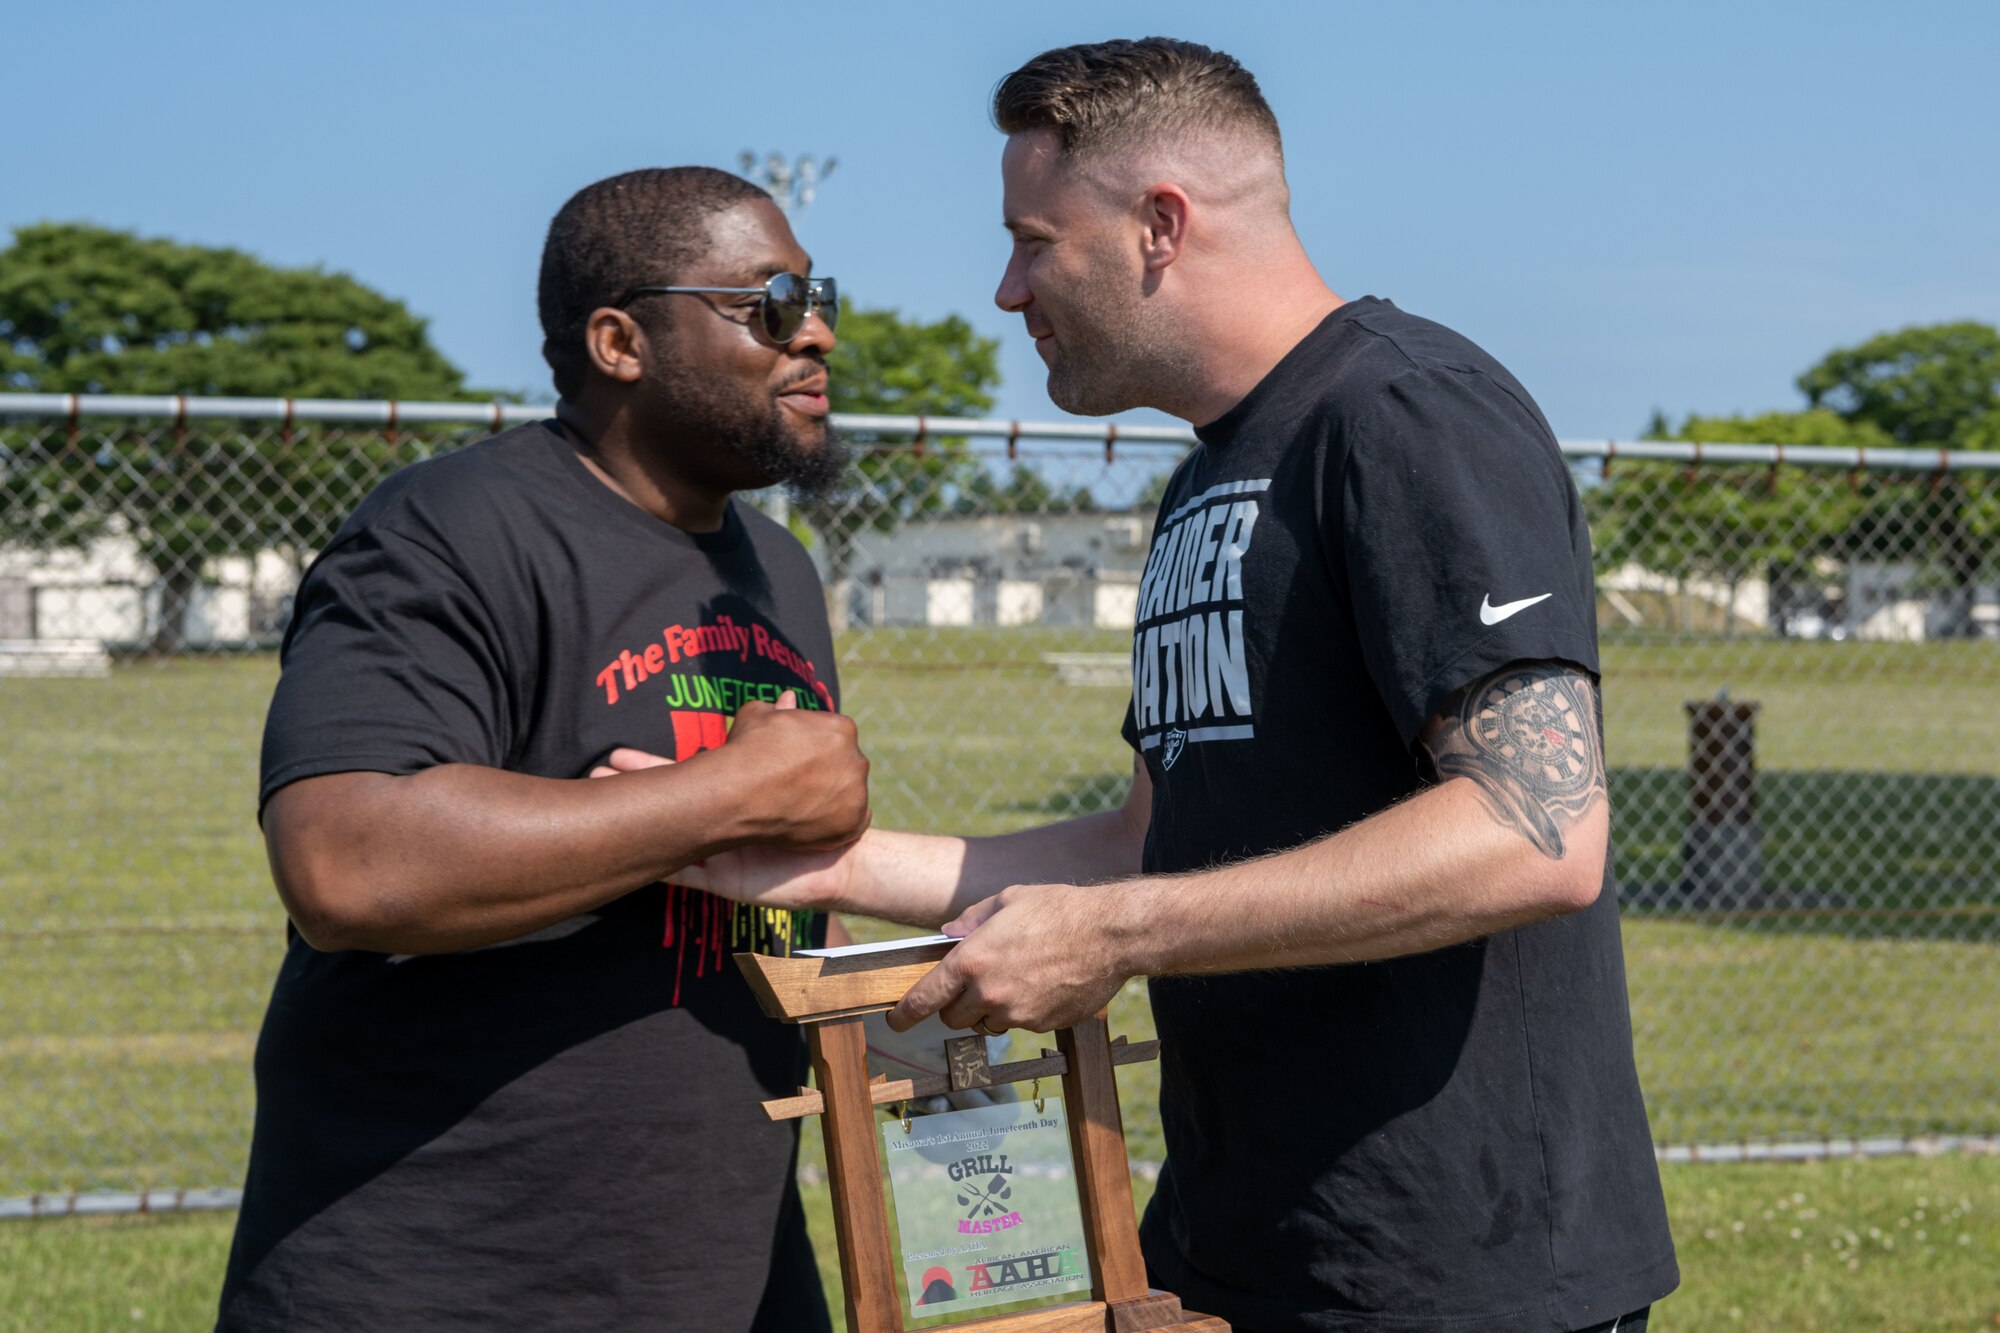 Mr. Shy Jackson, left, 35th Communications Squadron member, congratulates the winner of the grill masters competition, Master Sgt. Joseph Ross, right, 35th Medical Support Squadron member, during the Juneteenth Family Reunion event at Misawa Air Base, Japan, June 18, 2022.